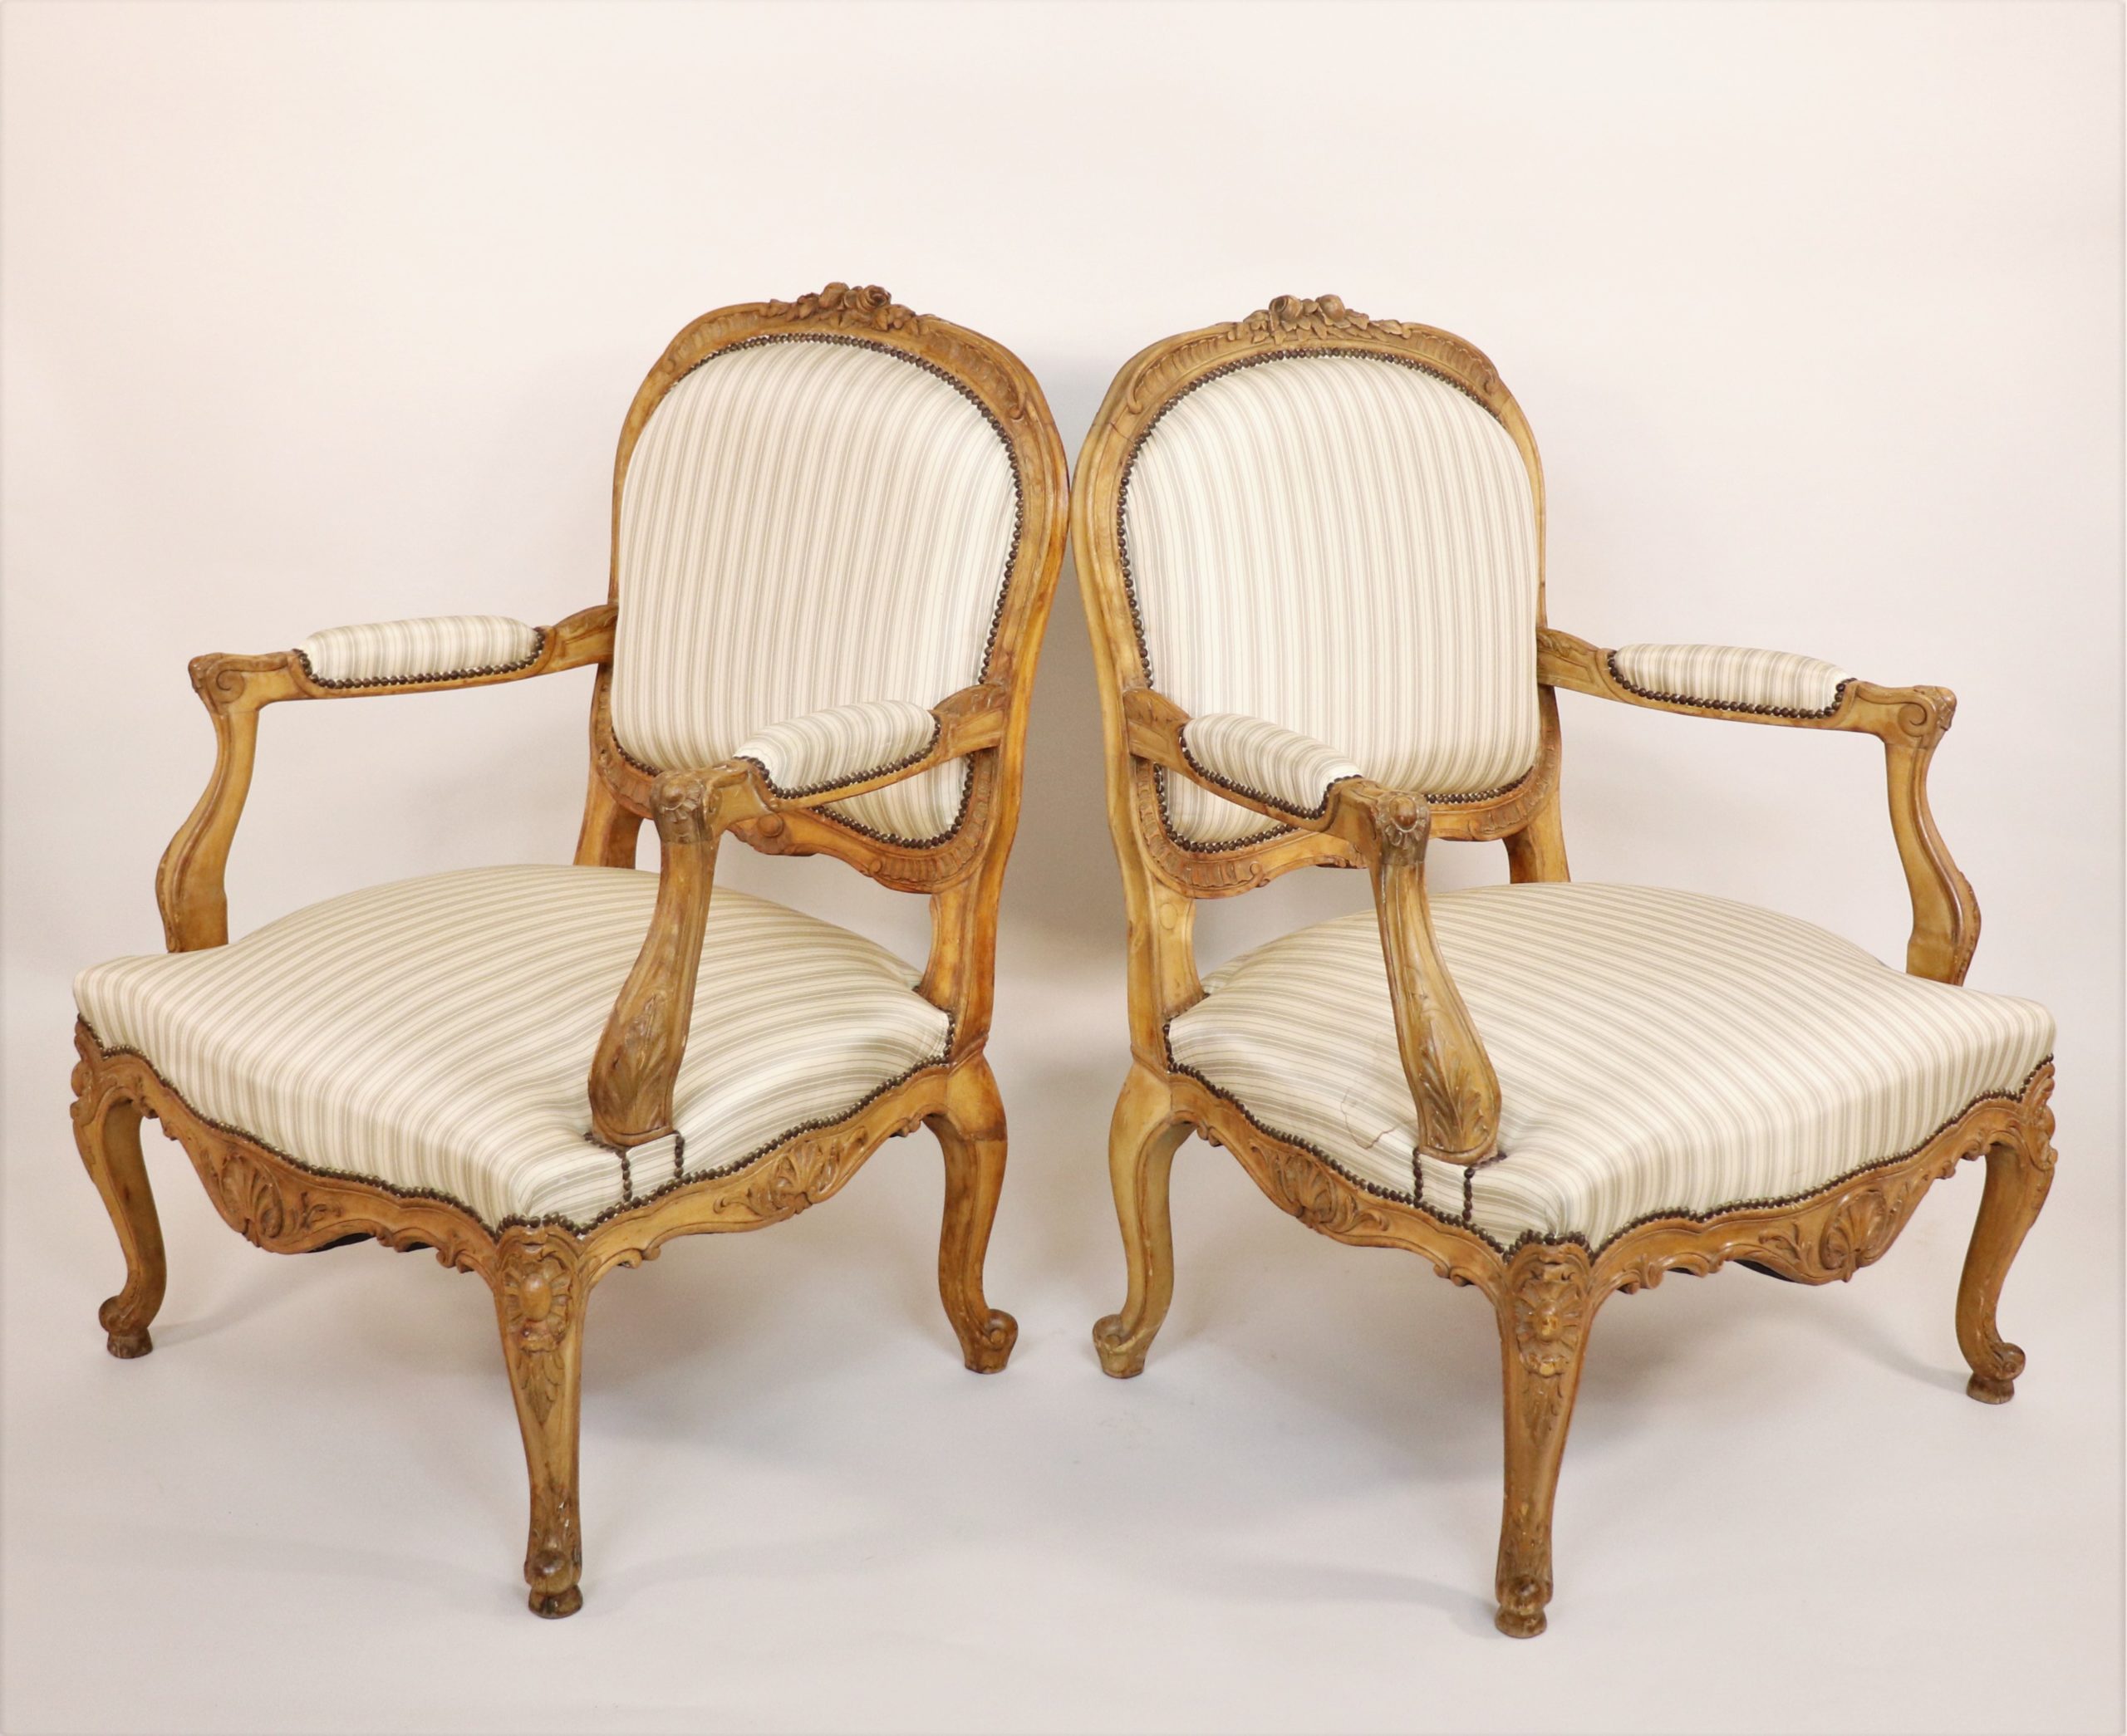 Circa 1940 French Louis XVI Style Children's Armchair Attributed to Maison  Jansen - Antiques Resources, Chicago